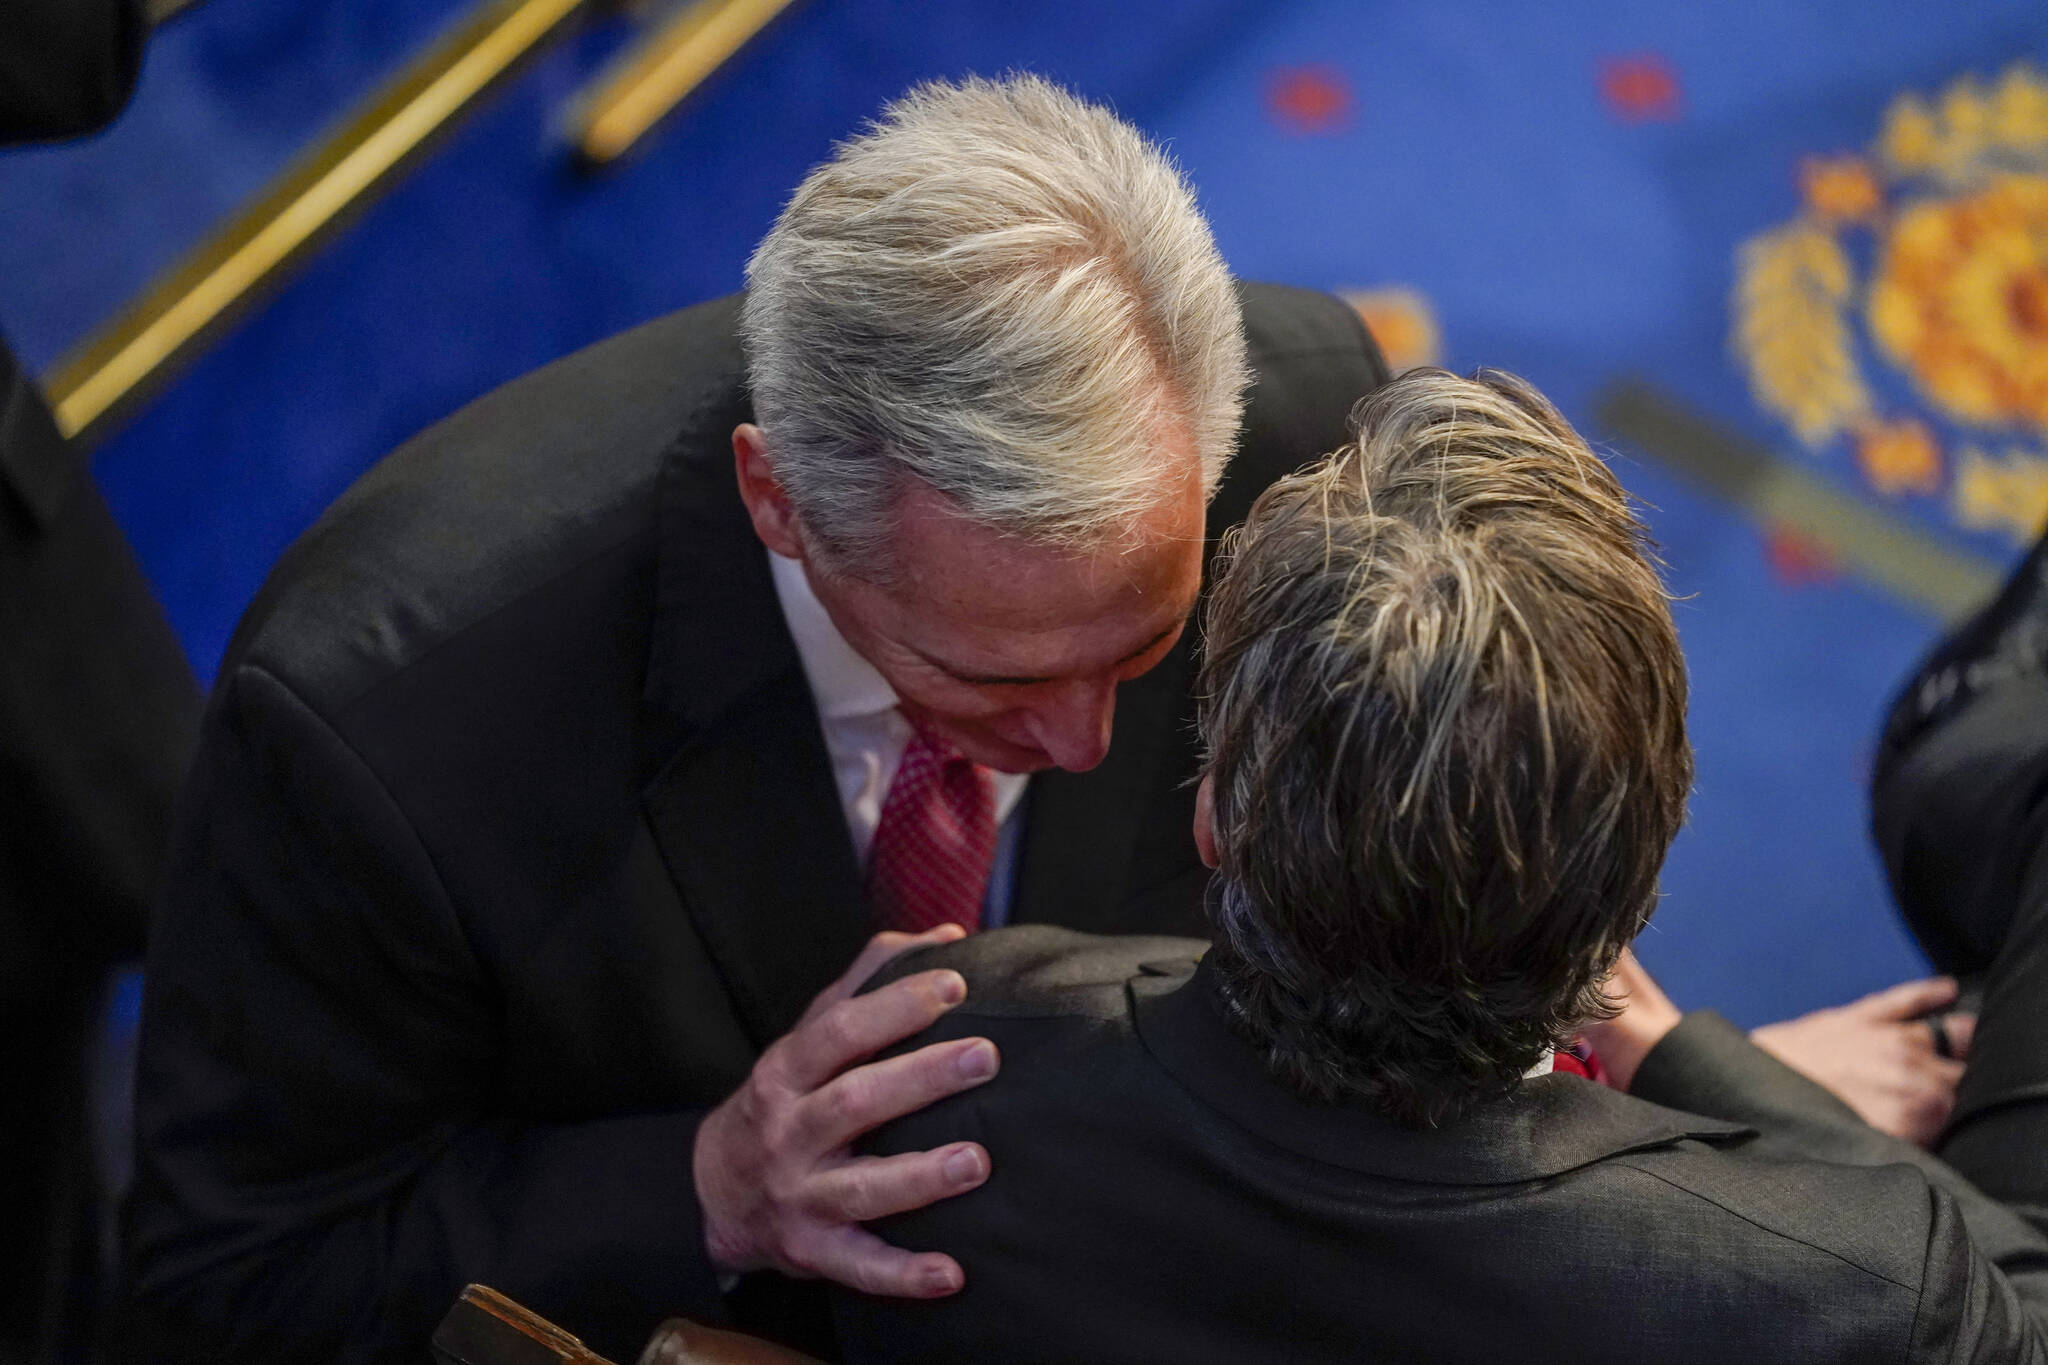 Rep. Kevin McCarthy, R-Calif., talks with Rep. Andy Ogles, R-Tenn. Before the eighth round of voting for speaker as the House meets for the third day to elect a speaker and convene the 118th Congress in Washington, Thursday, Jan. 5, 2023. (AP Photo / Andrew Harnik)